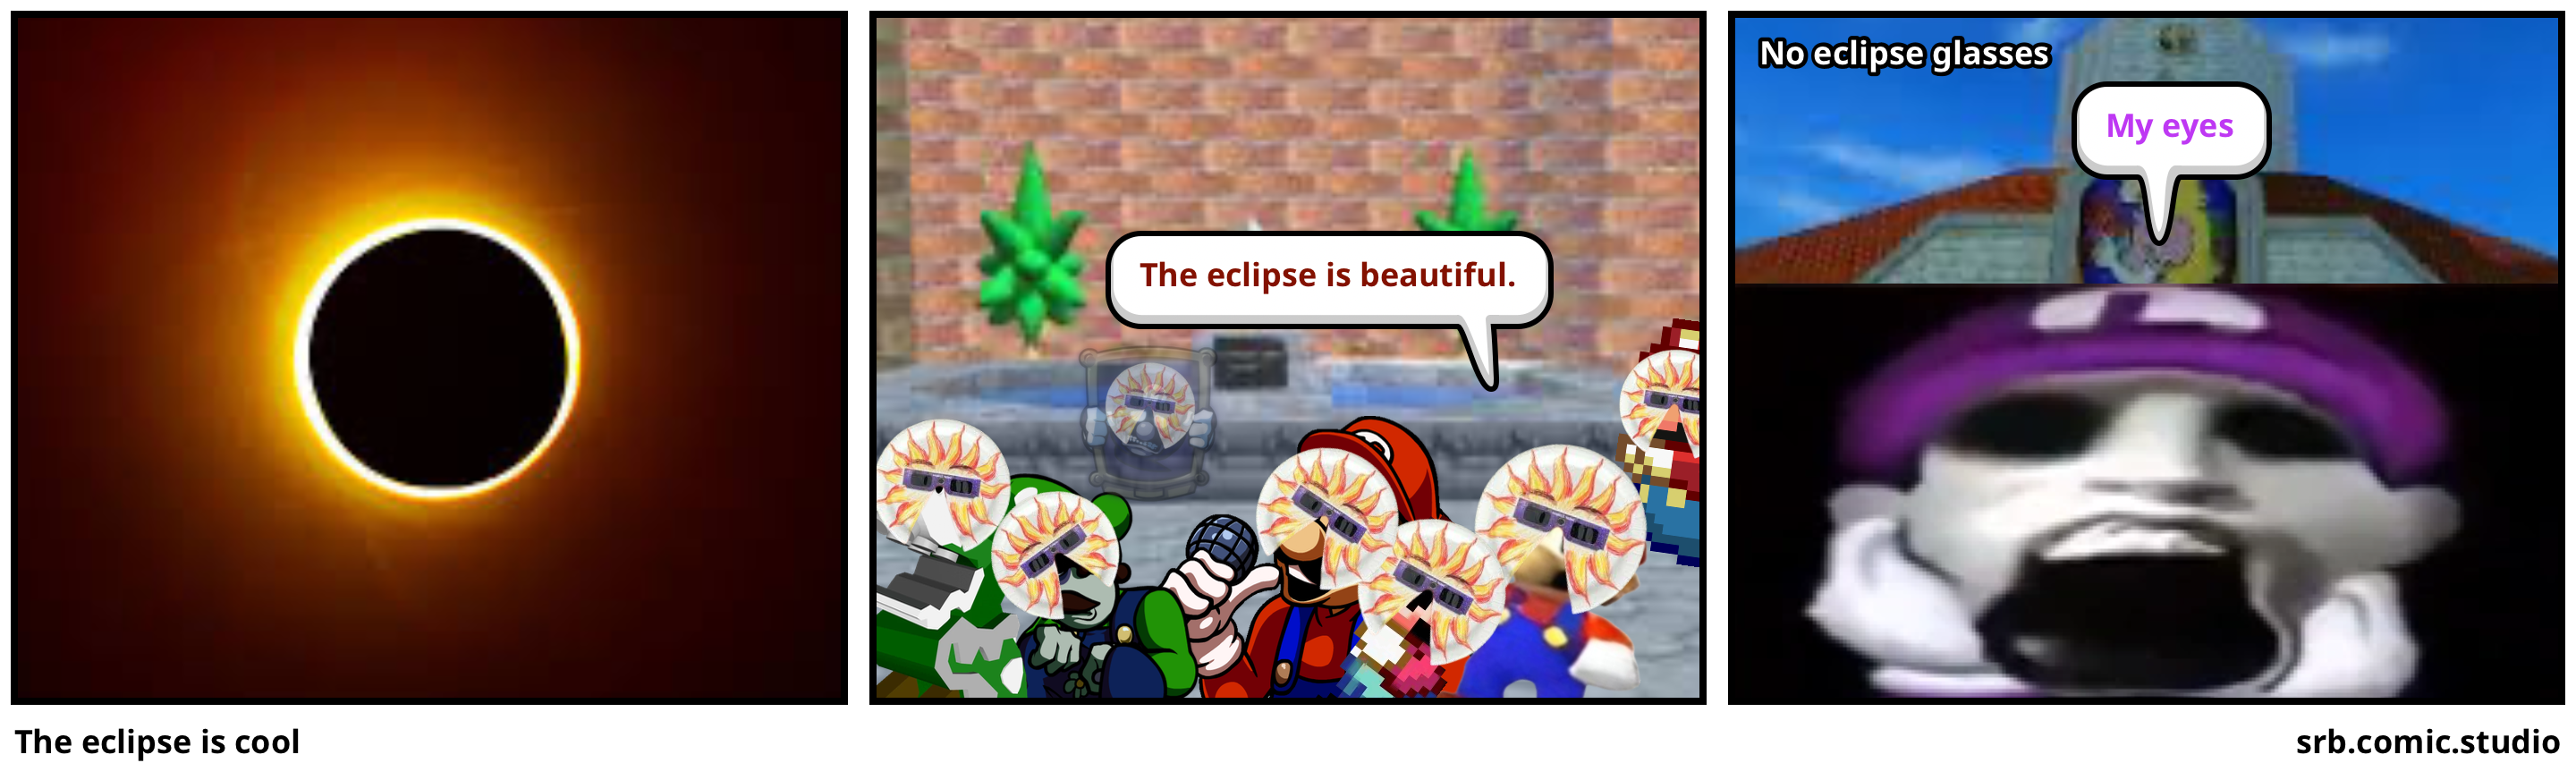 The eclipse is cool